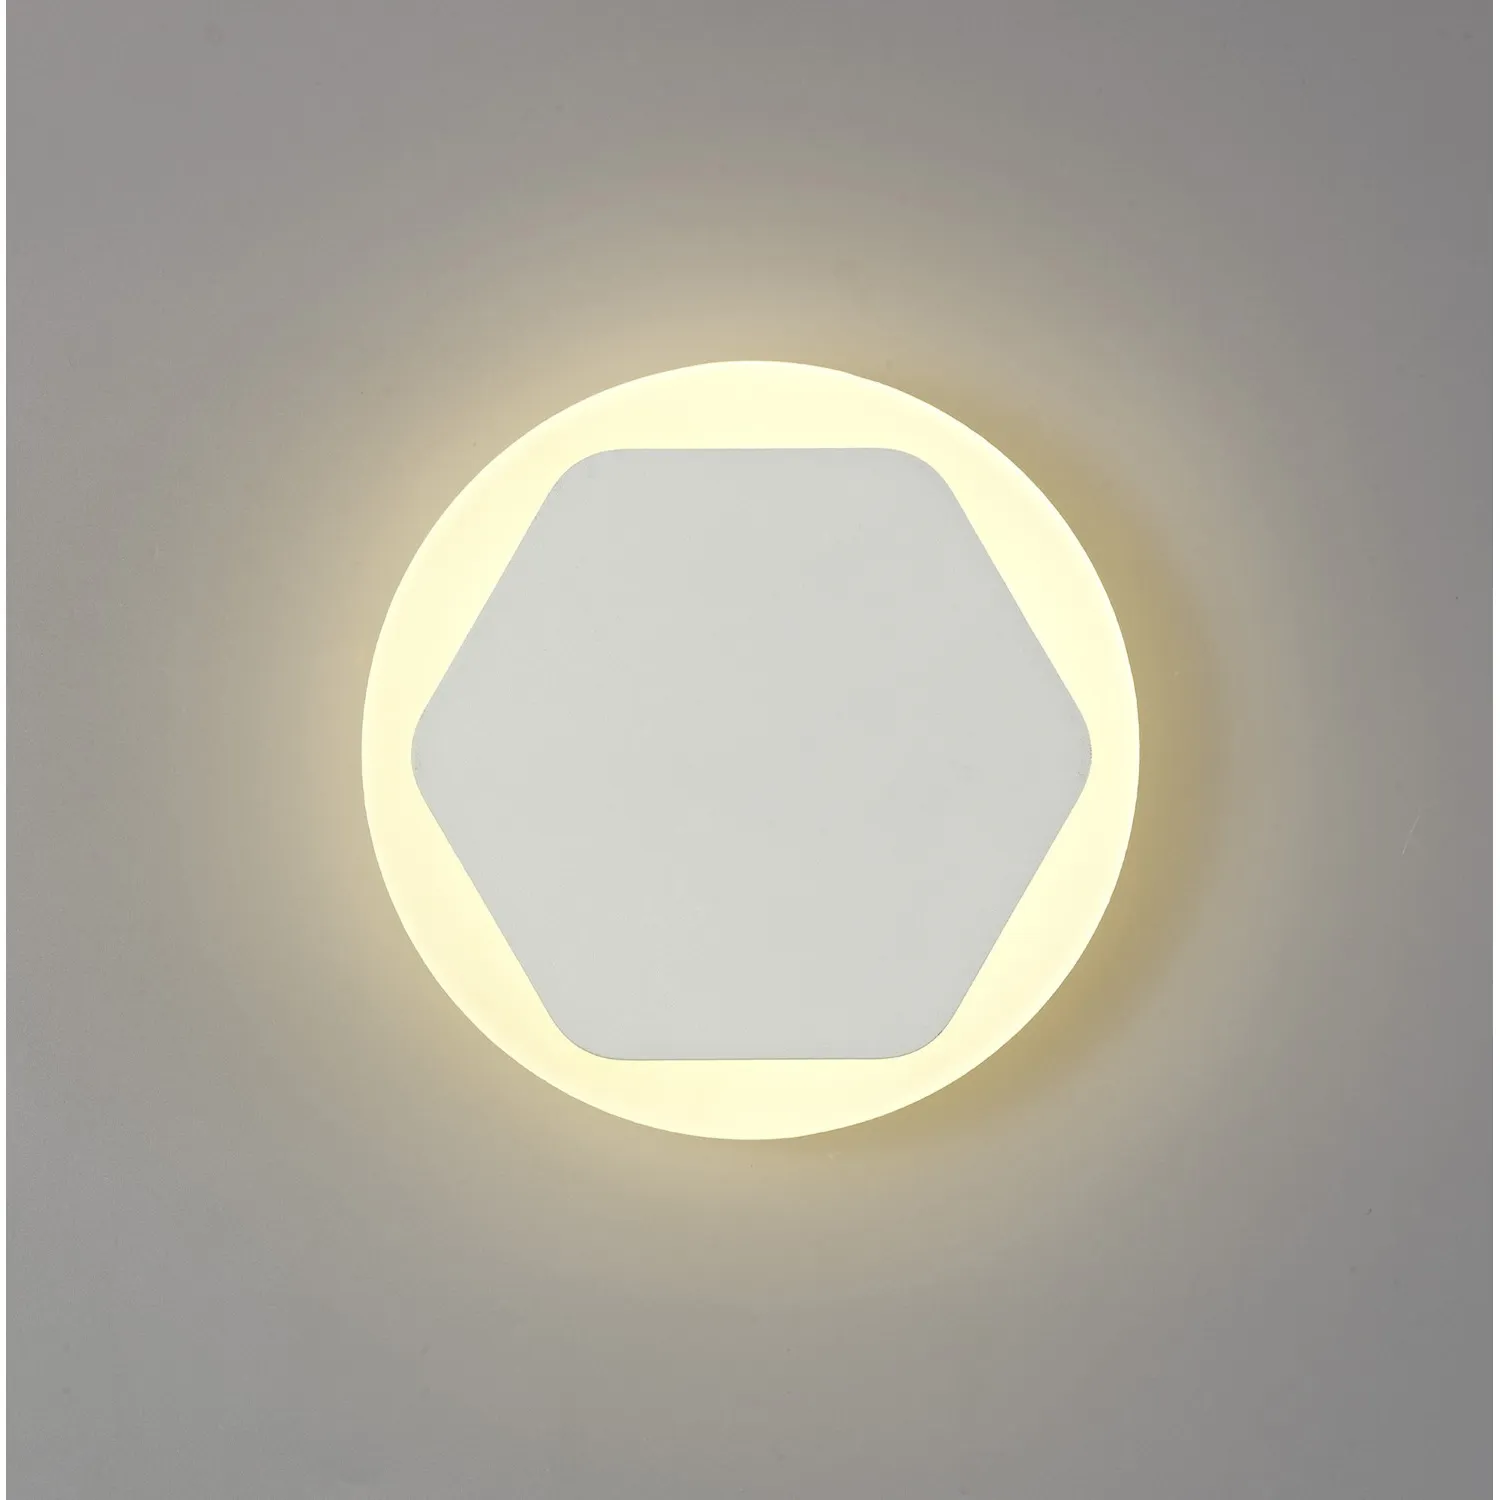 Edgware Magnetic Base Wall Lamp, 12W LED 3000K 498lm, 15 19cm Horizontal Hexagonal Centre, Sand White Round Acrylic Frosted Diffuser